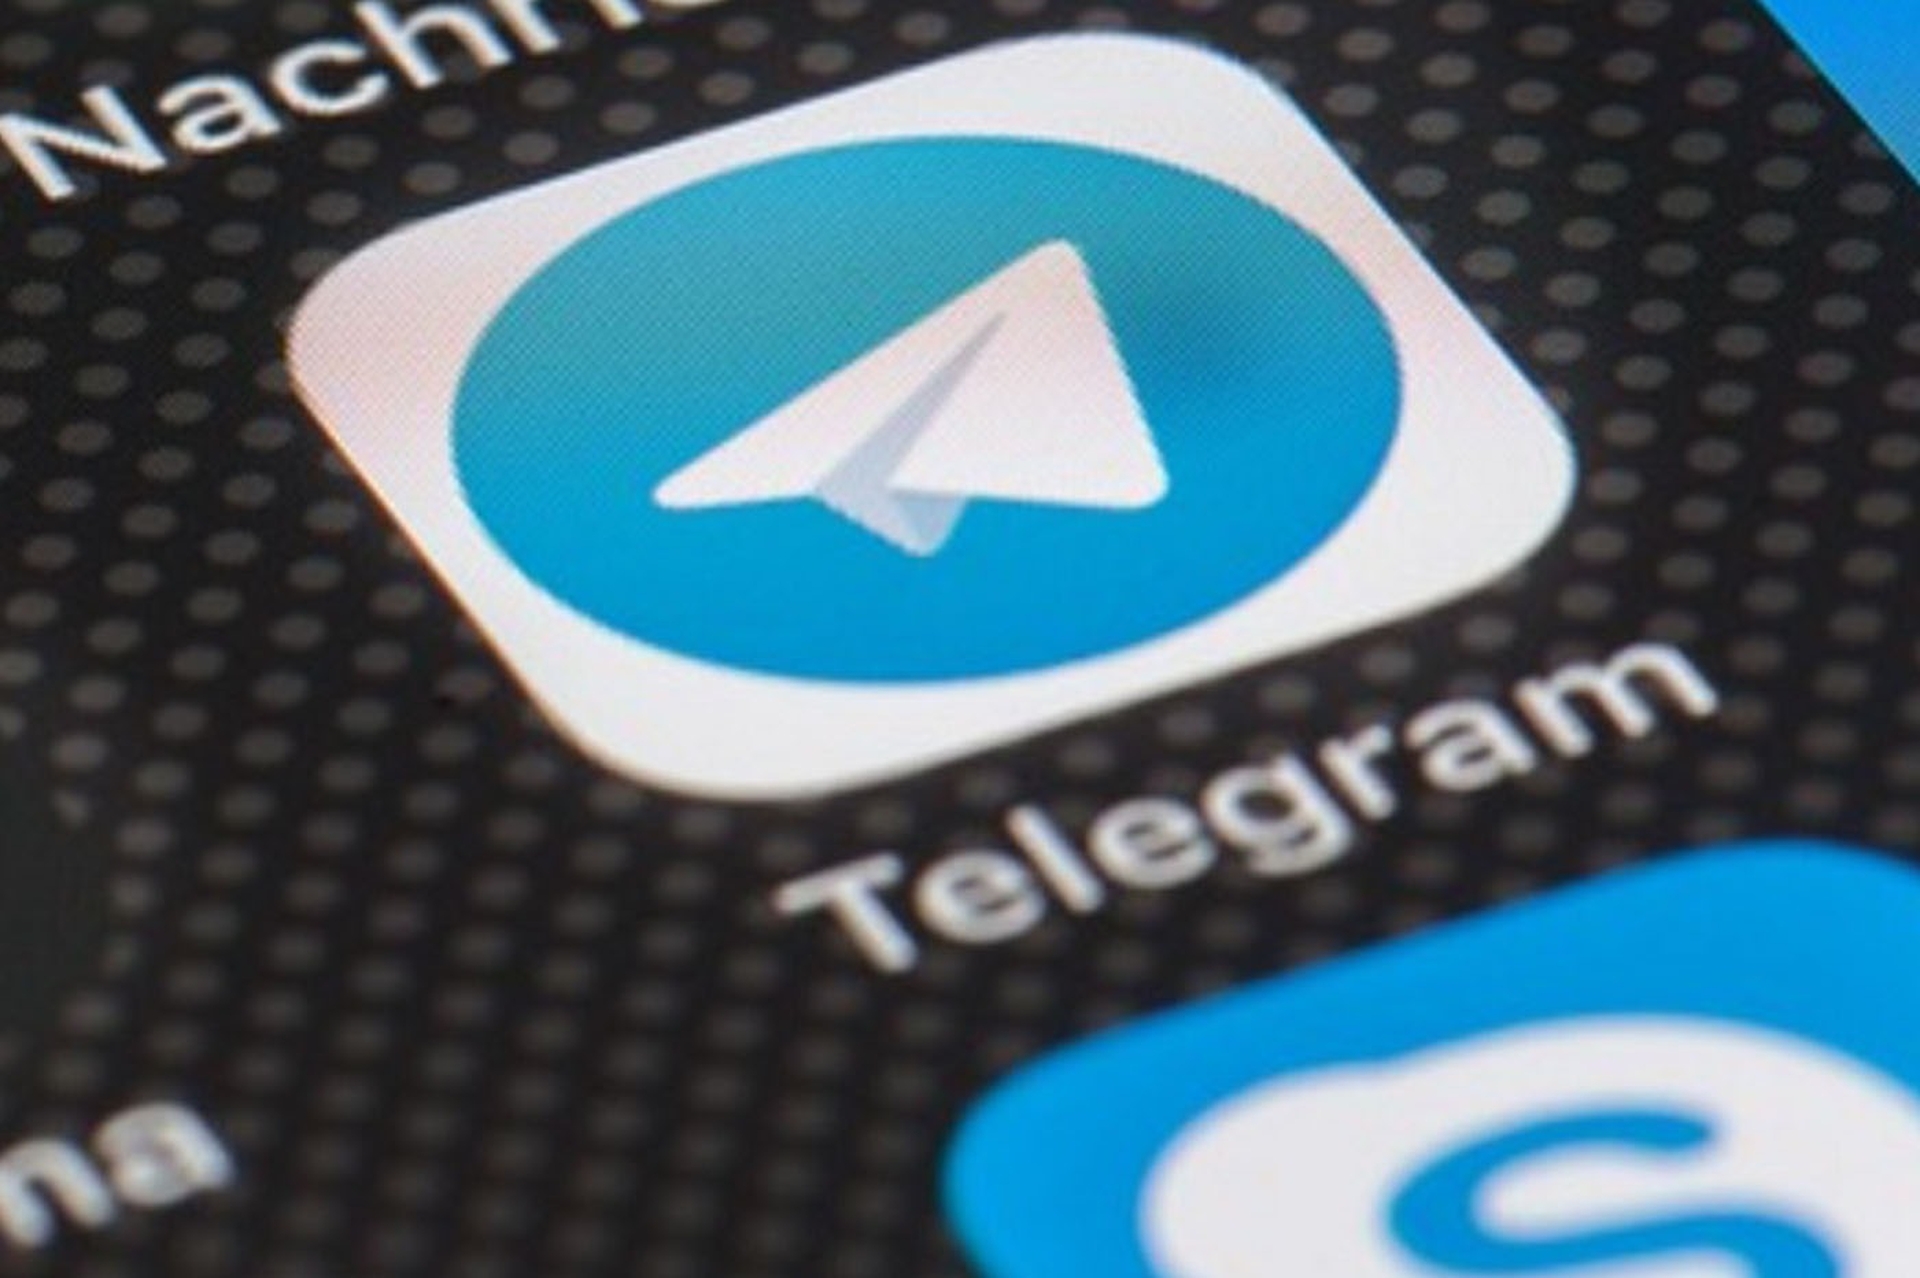 In this article, we are going to cover the leaked Telegram Premium and all of its features, and how it works.